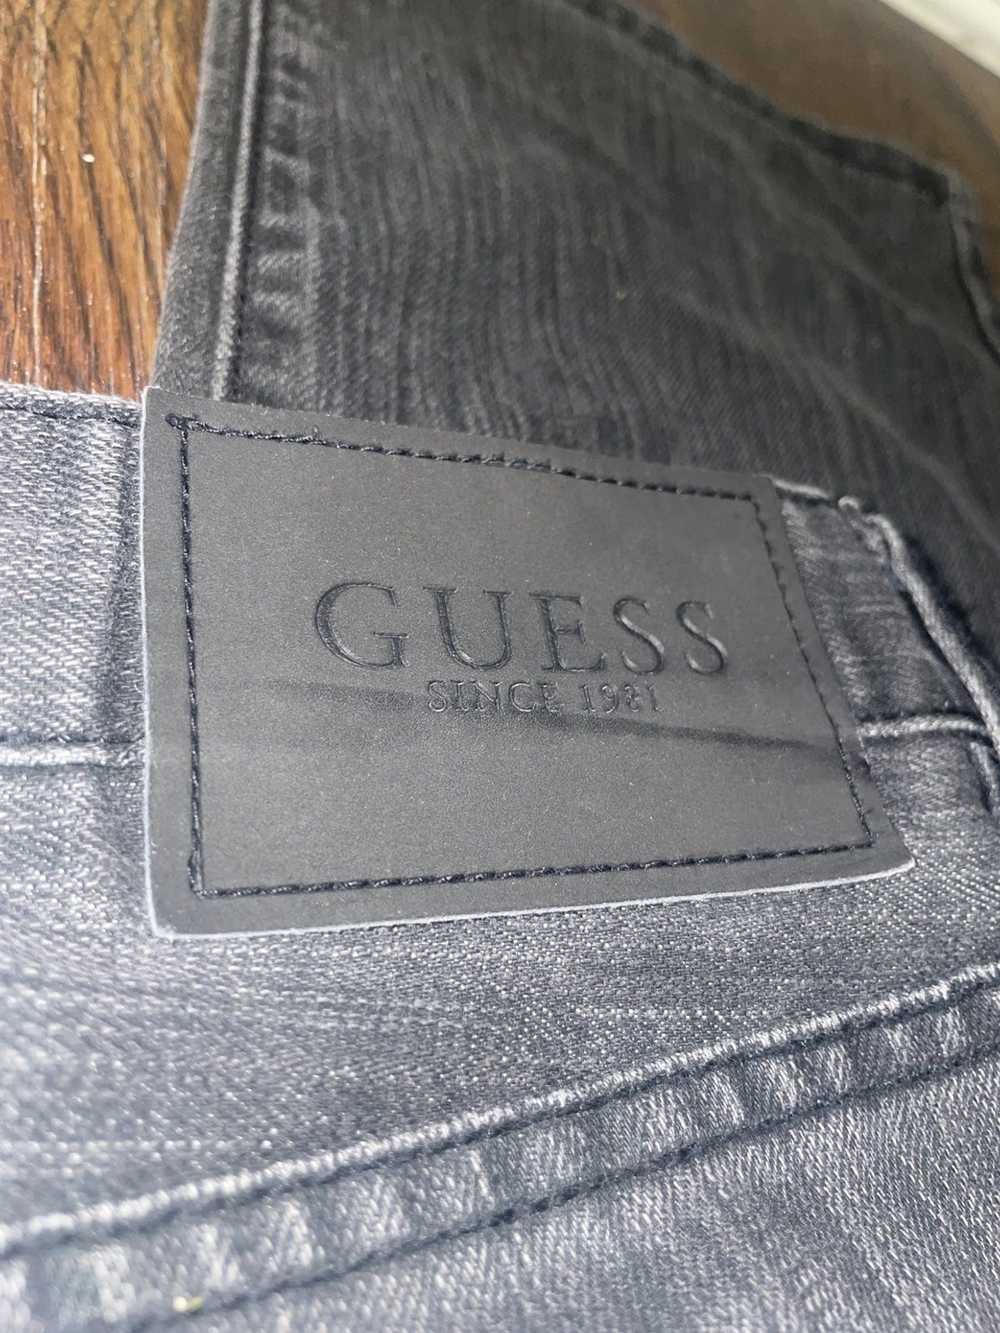 Guess Vintage GUESS jeans - image 7